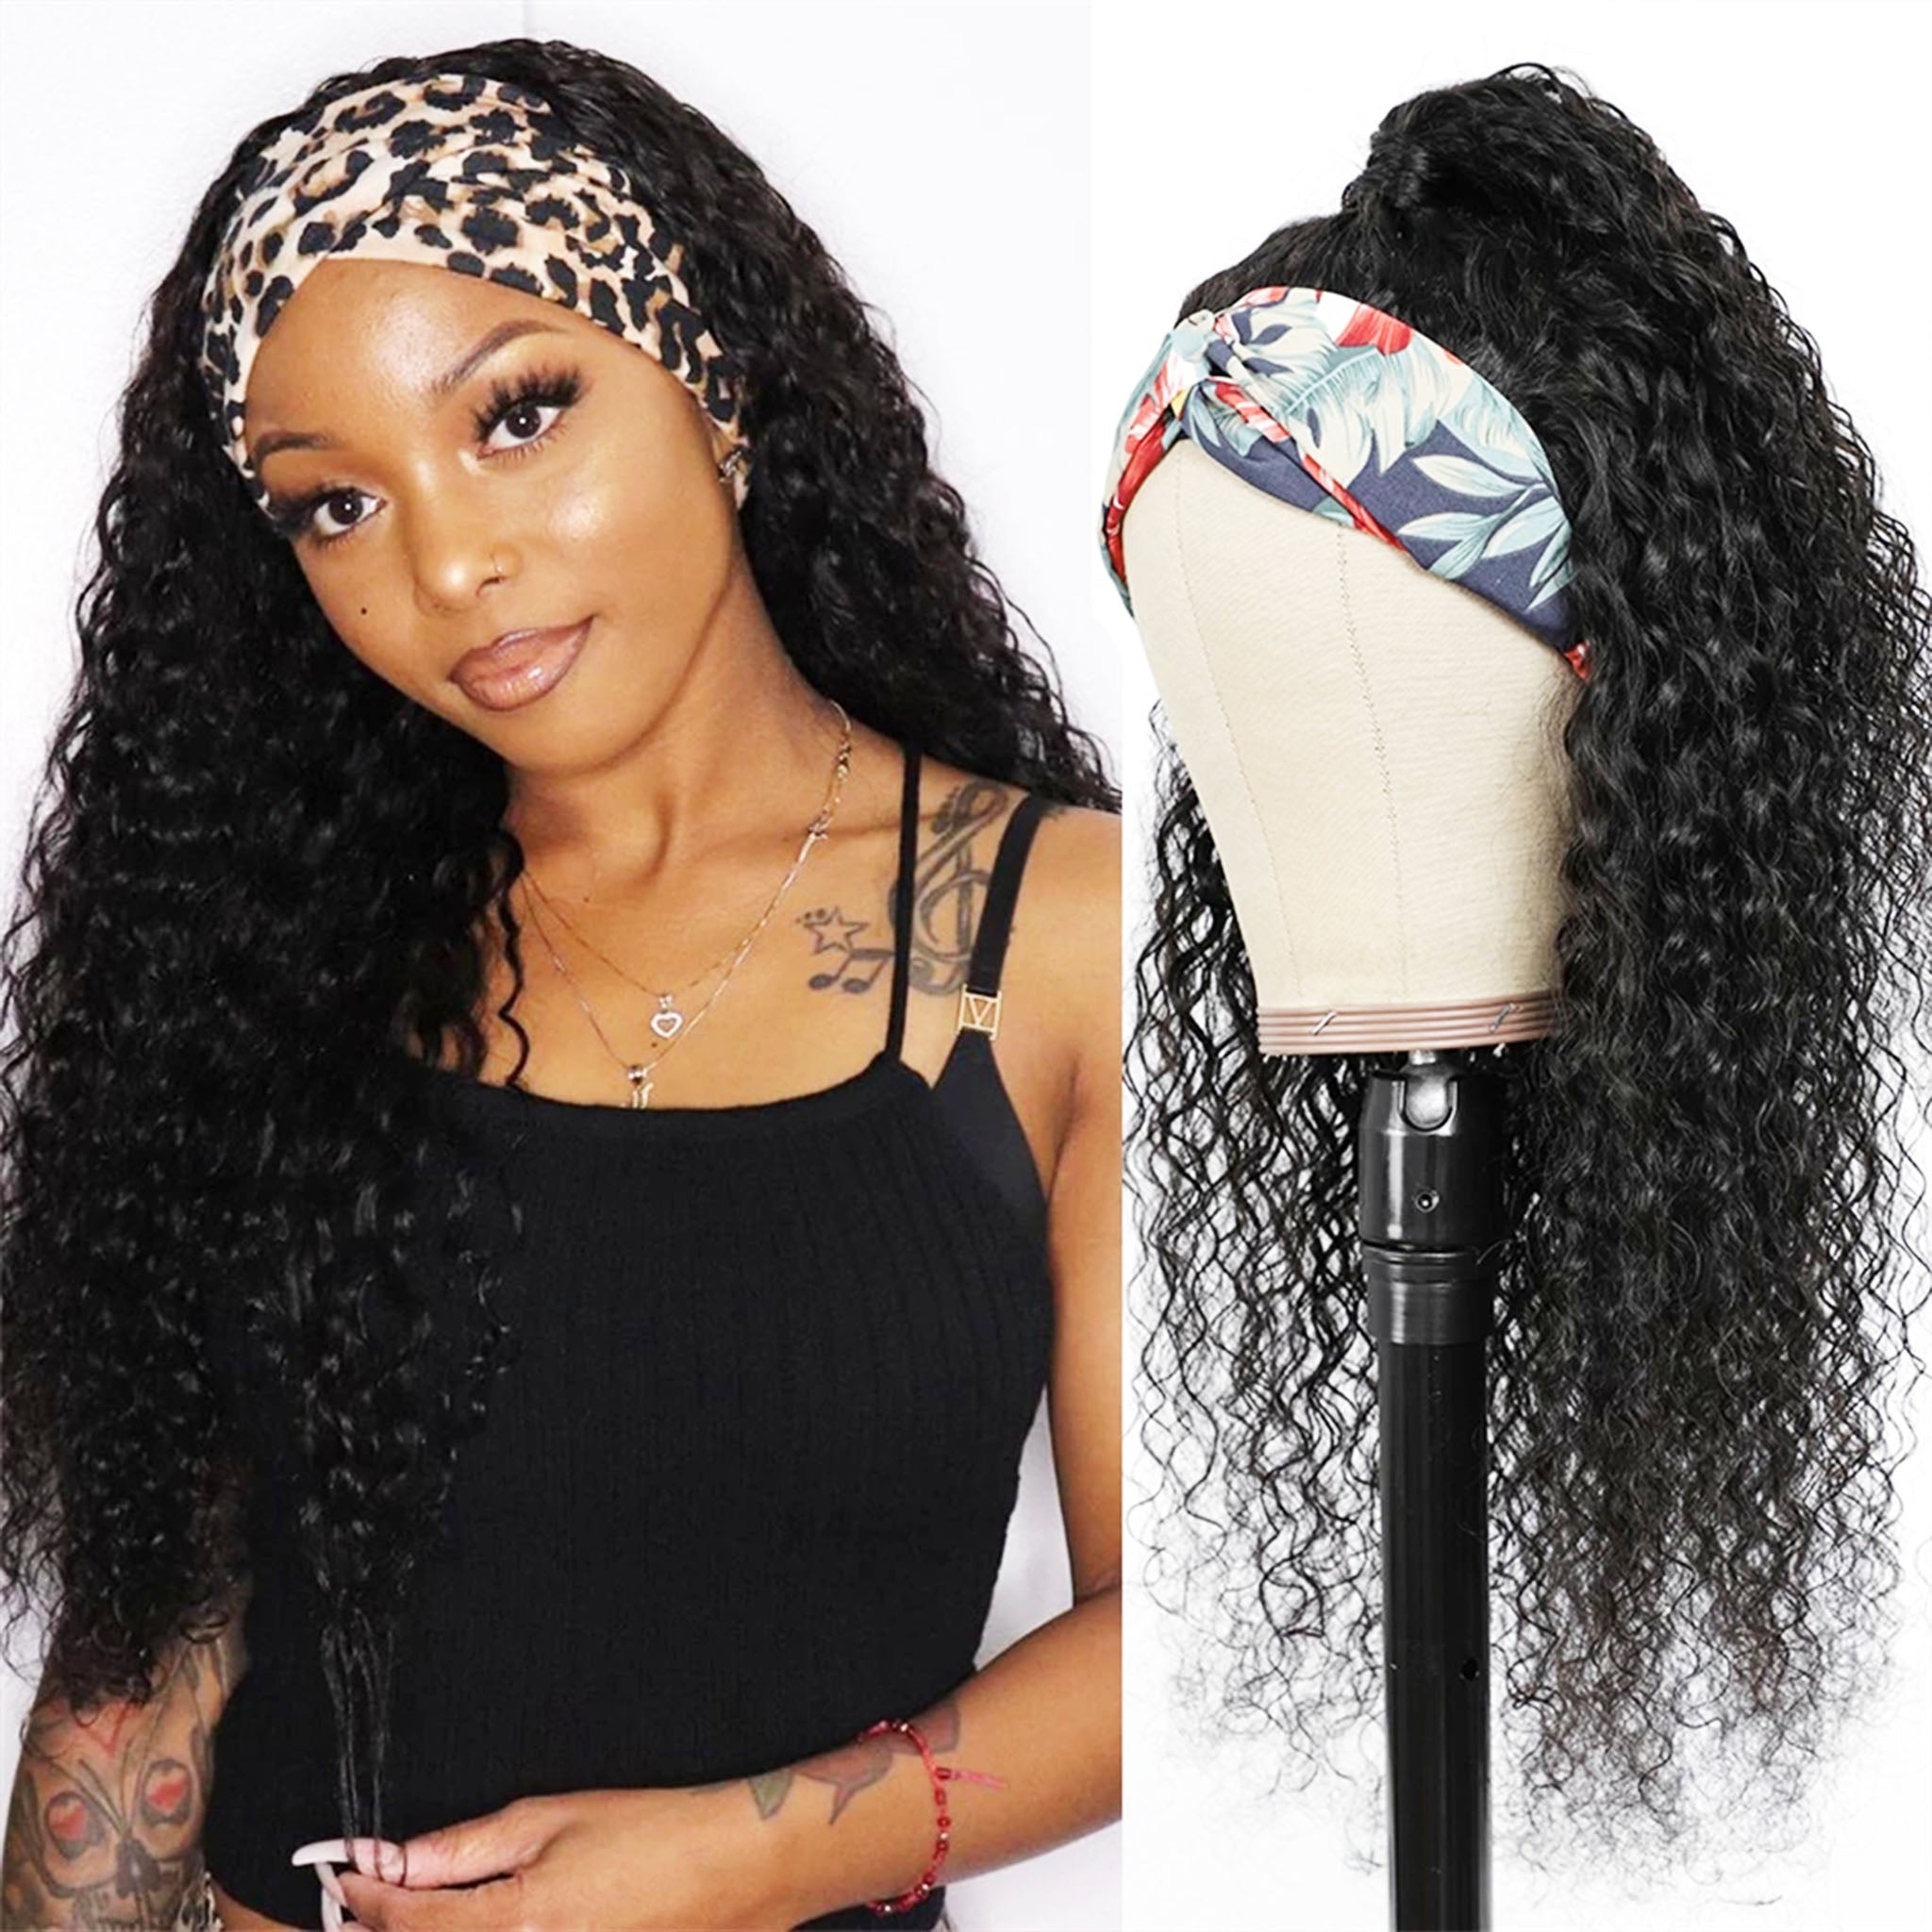 Abbily Headband Wigs Glue Free Curly/Straight Human Hair Wigs For African American